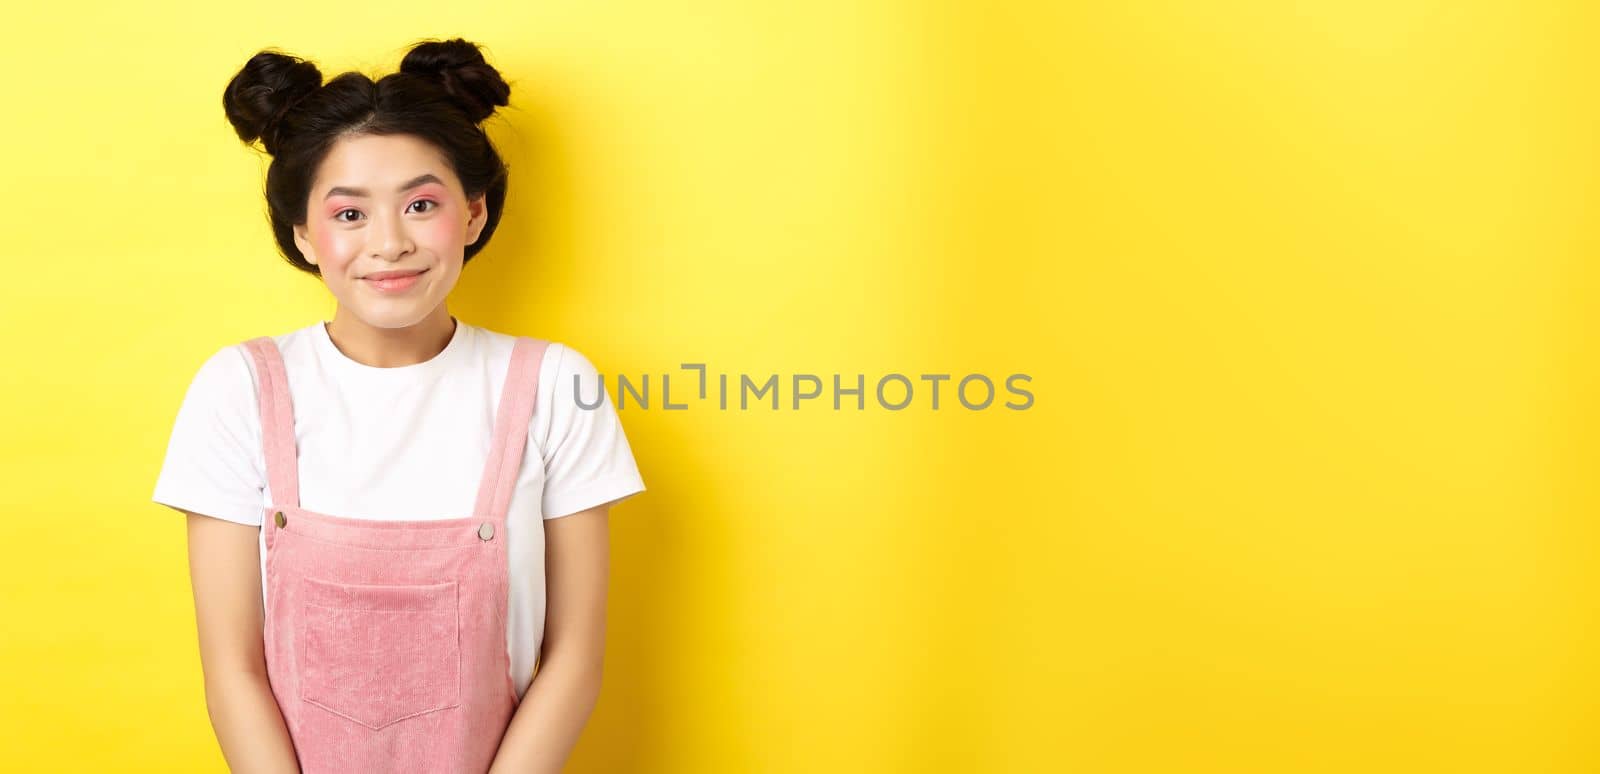 Cute asian woman with makeup and summer clothes, smiling silly and happy at camera, yellow background.